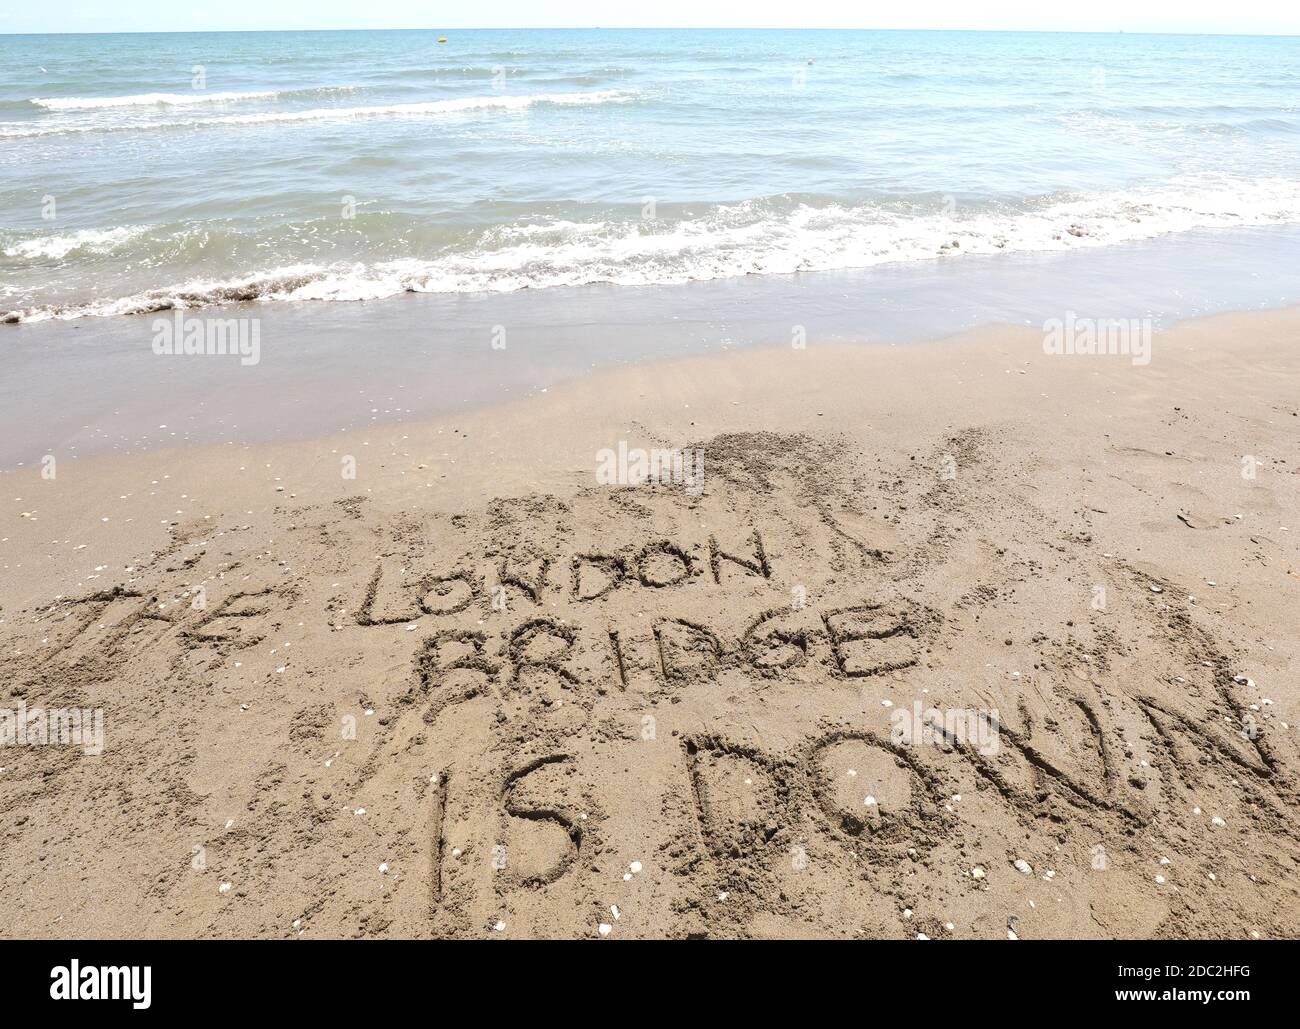 london bridge is down which is the name of the operation when the Queen of England dies written on the beach Stock Photo